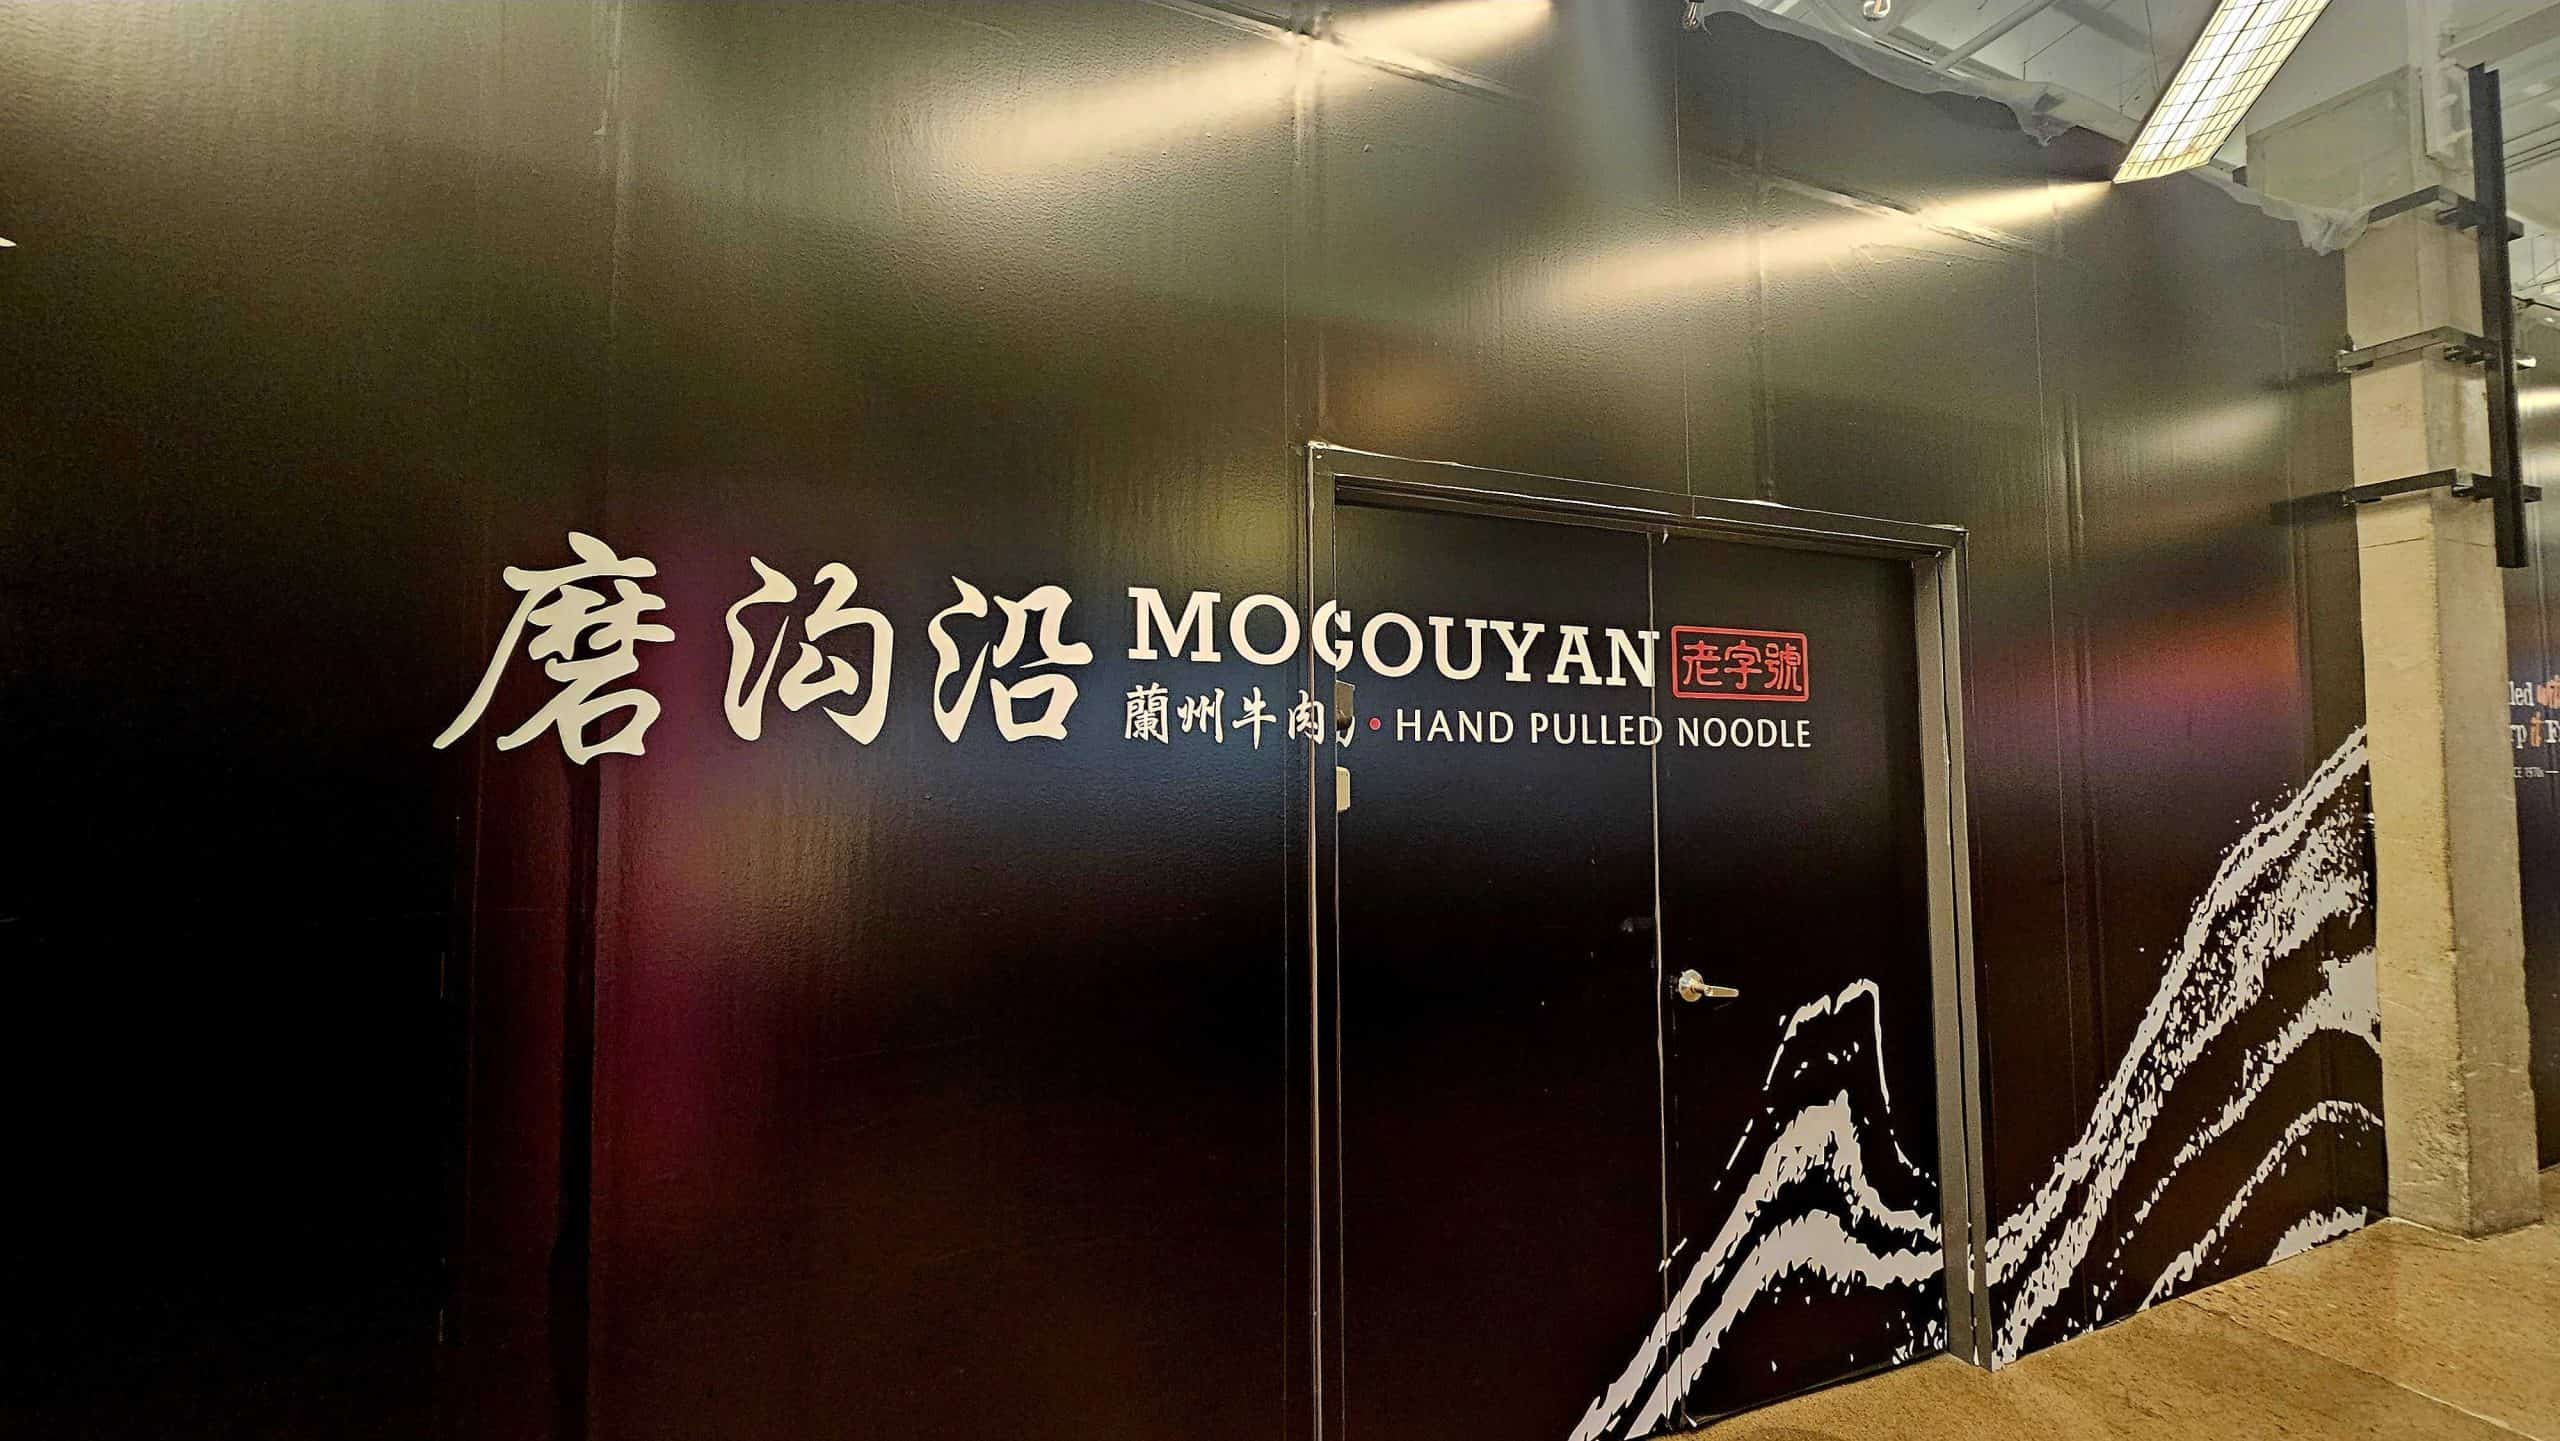 new hand pulled noodle restaurant mogouyan square one food district mississauga